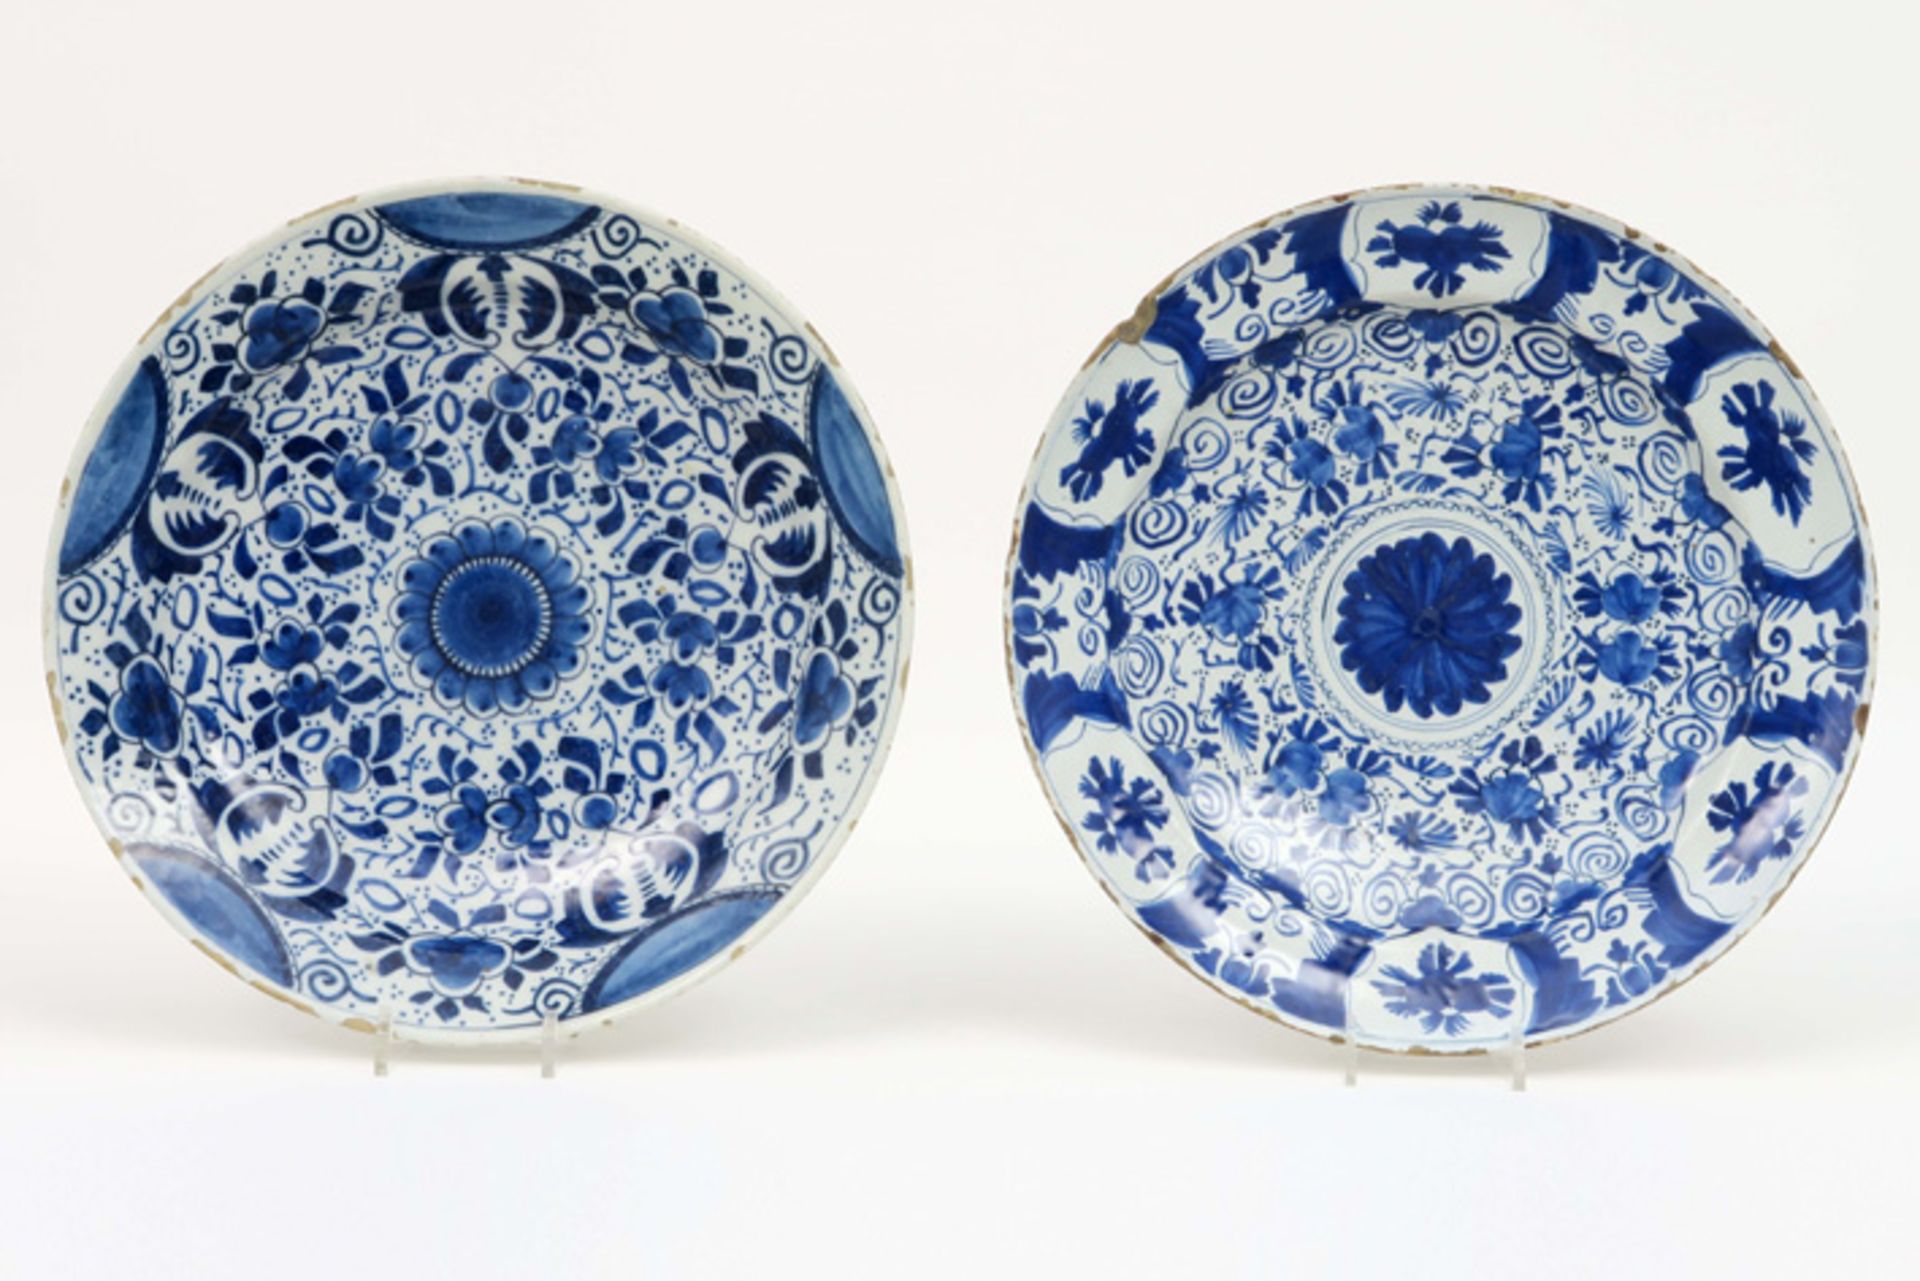 pair of quite large round 18th Cent. dishes in ceramic from Delft with a blue-white flower decor||Pa